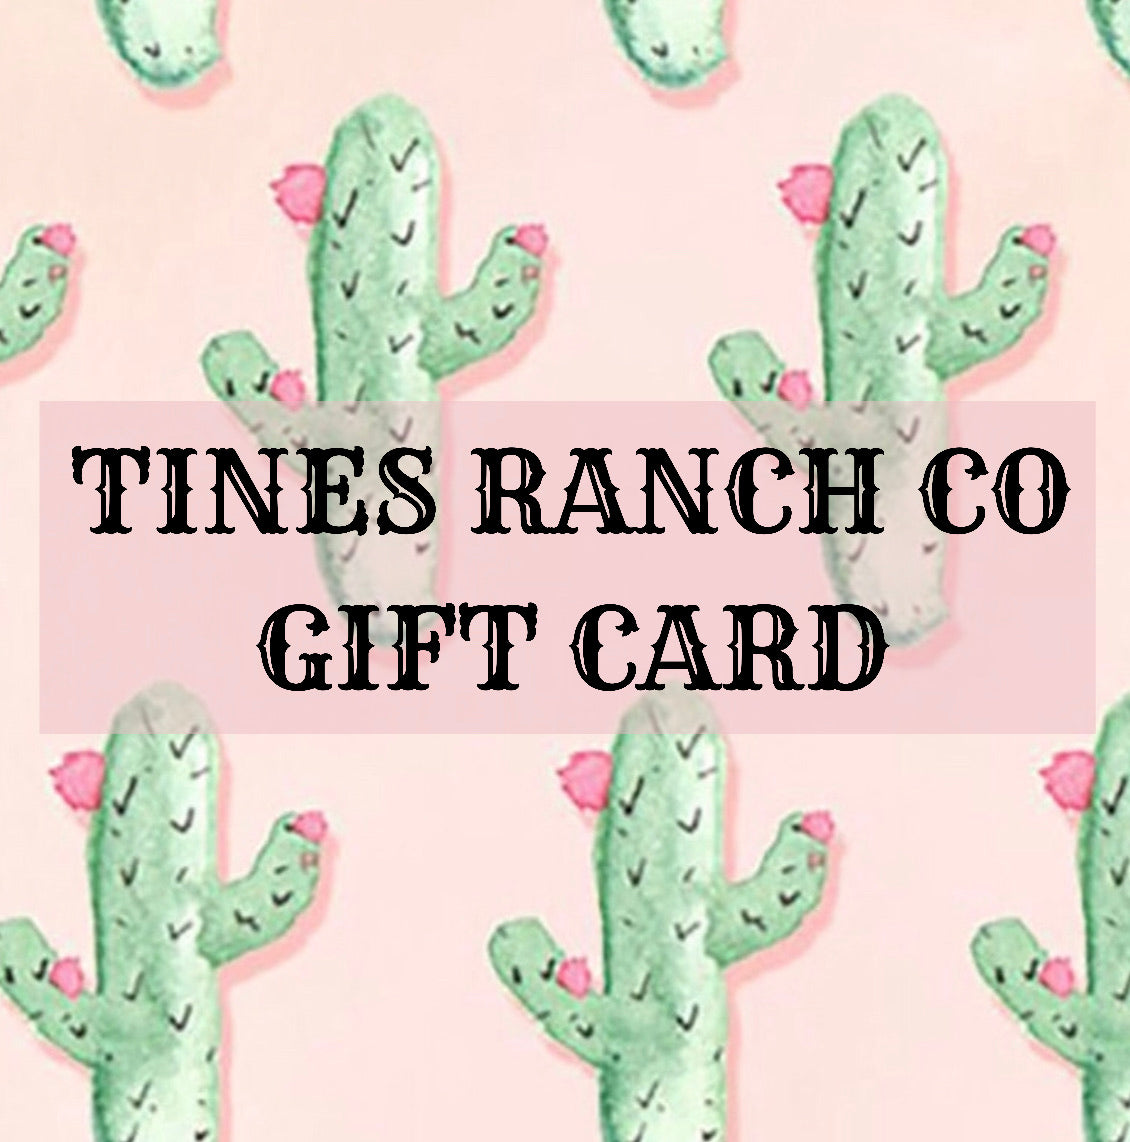 Tines Ranch Co Gift Card